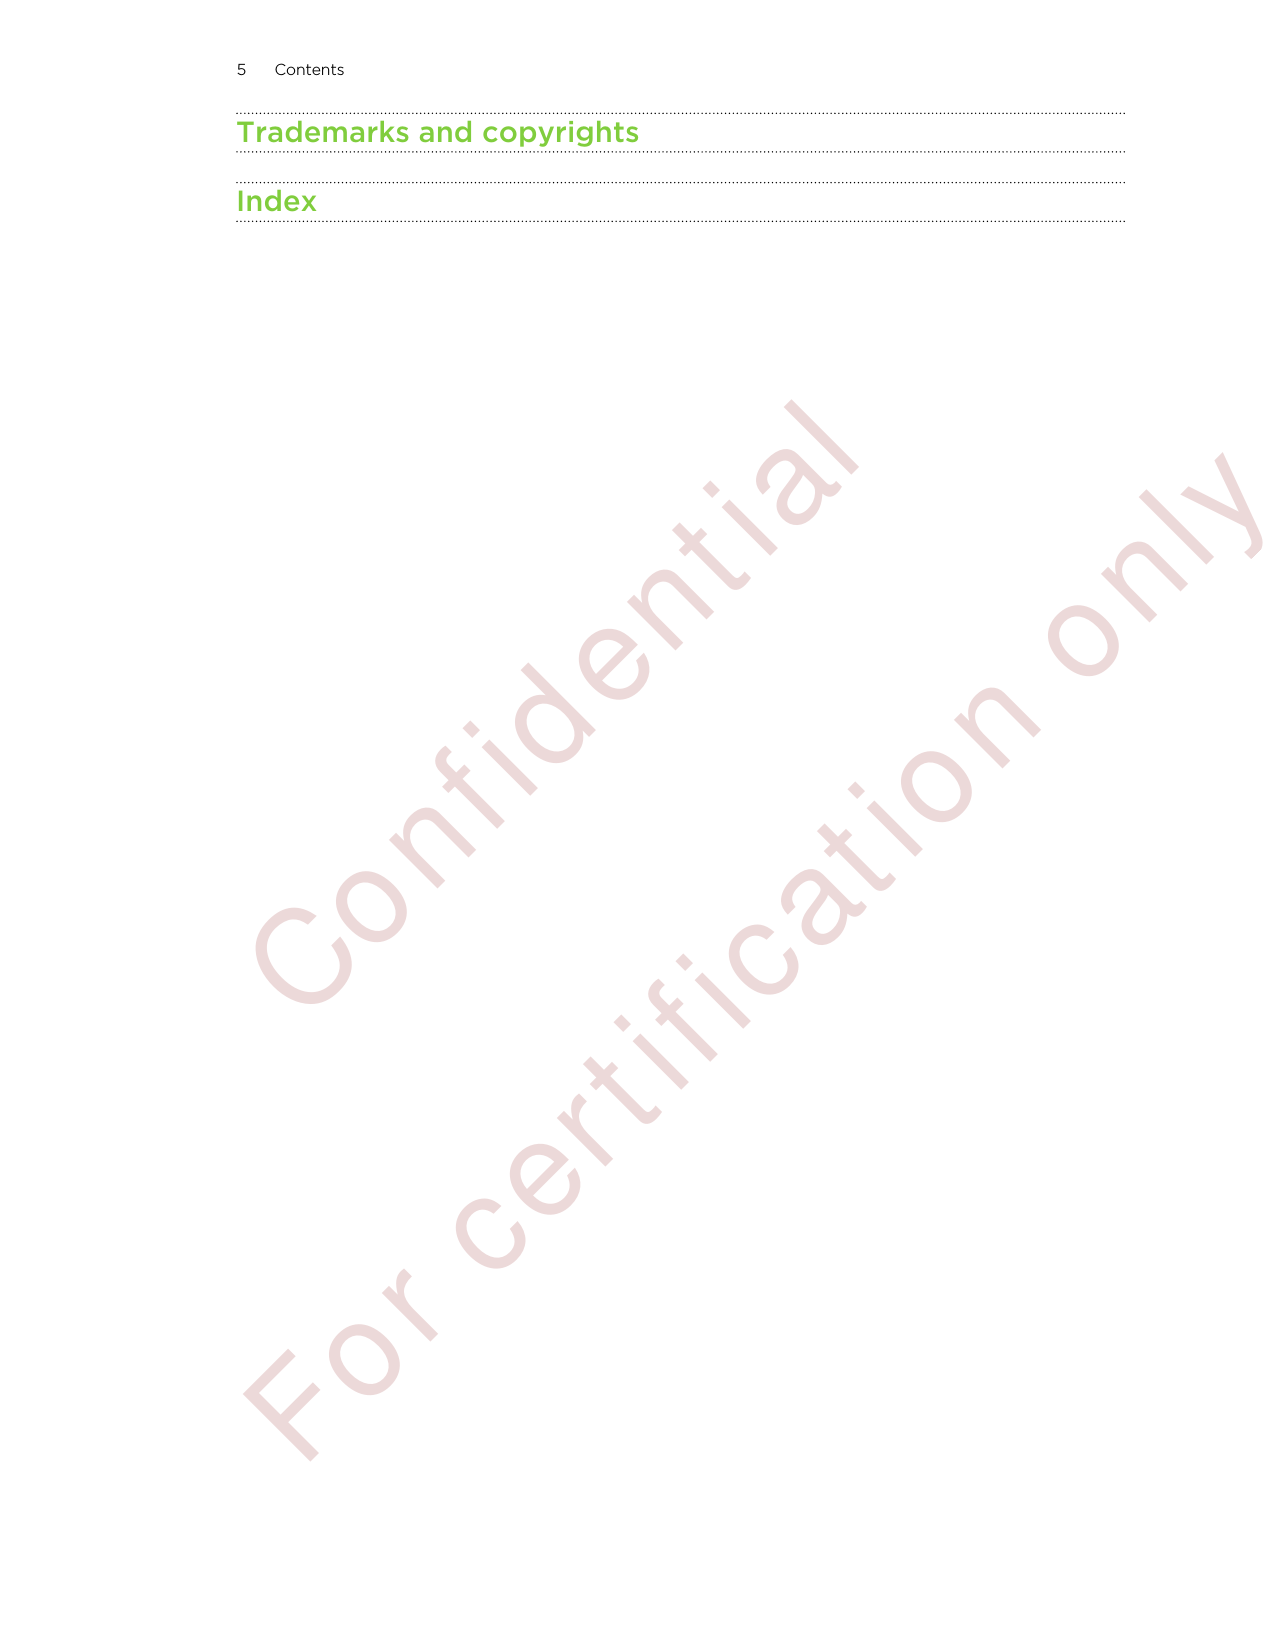 Trademarks and copyrightsIndex5 Contents        Confidential  For certification only